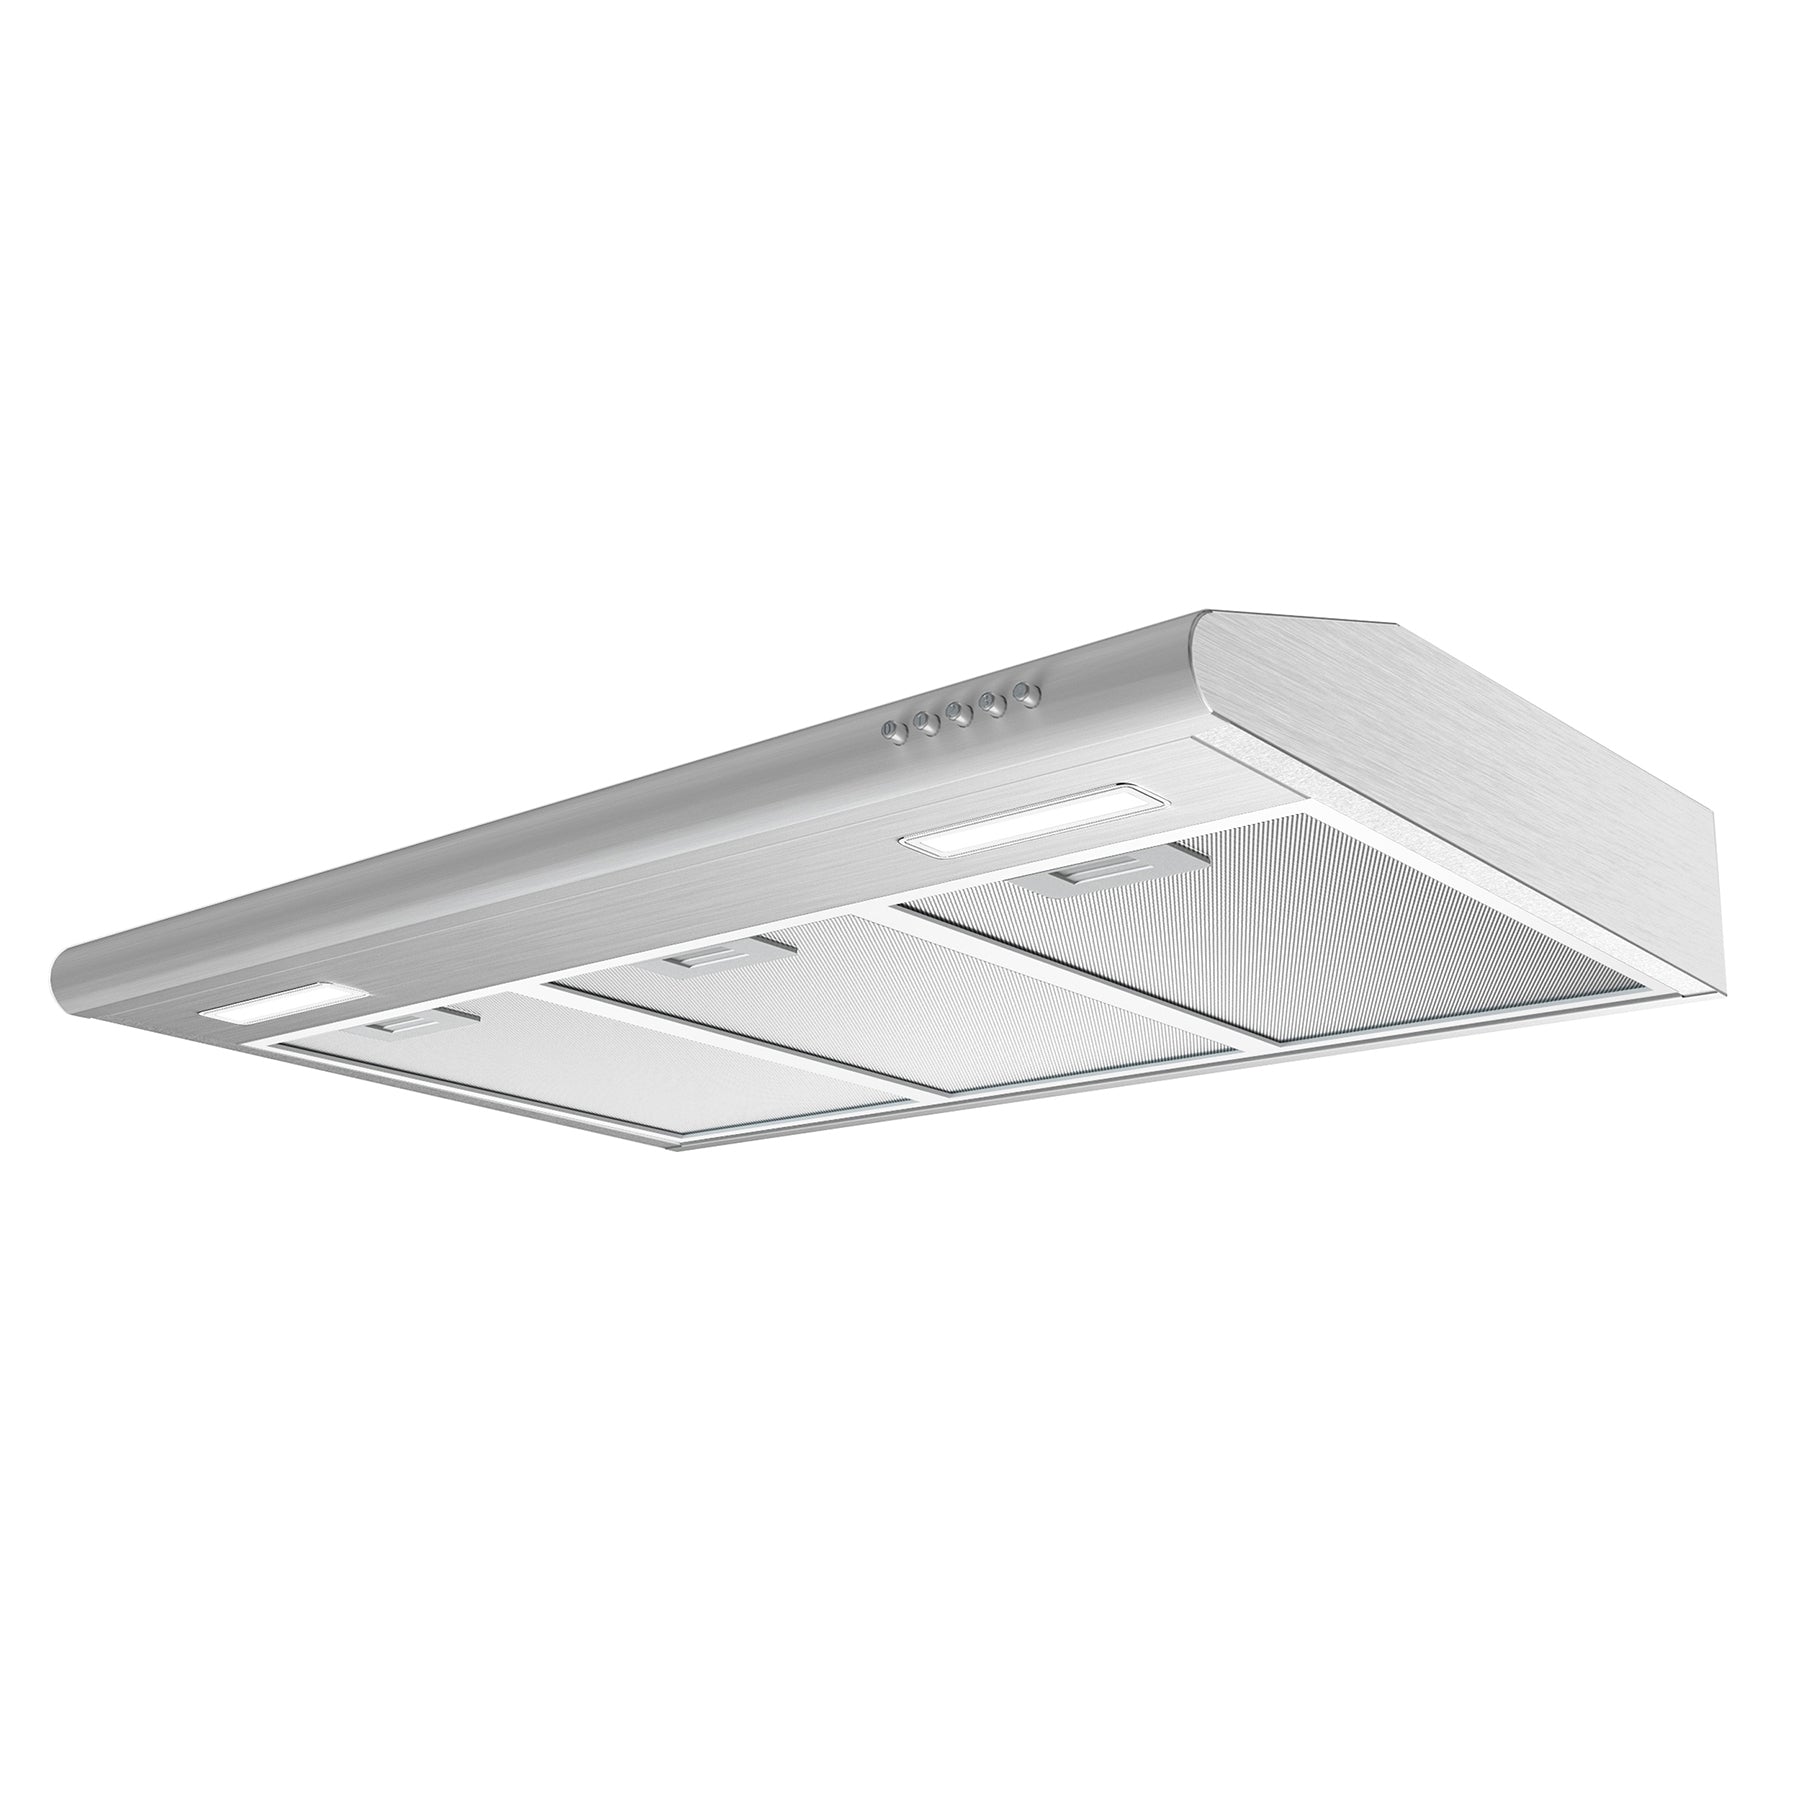 CIARRA Range Hood 30 inch 760m3/h Ductless Stove Hood Vent for Kitchen in  Stainless Steel, Ducted and Ductless Convertible